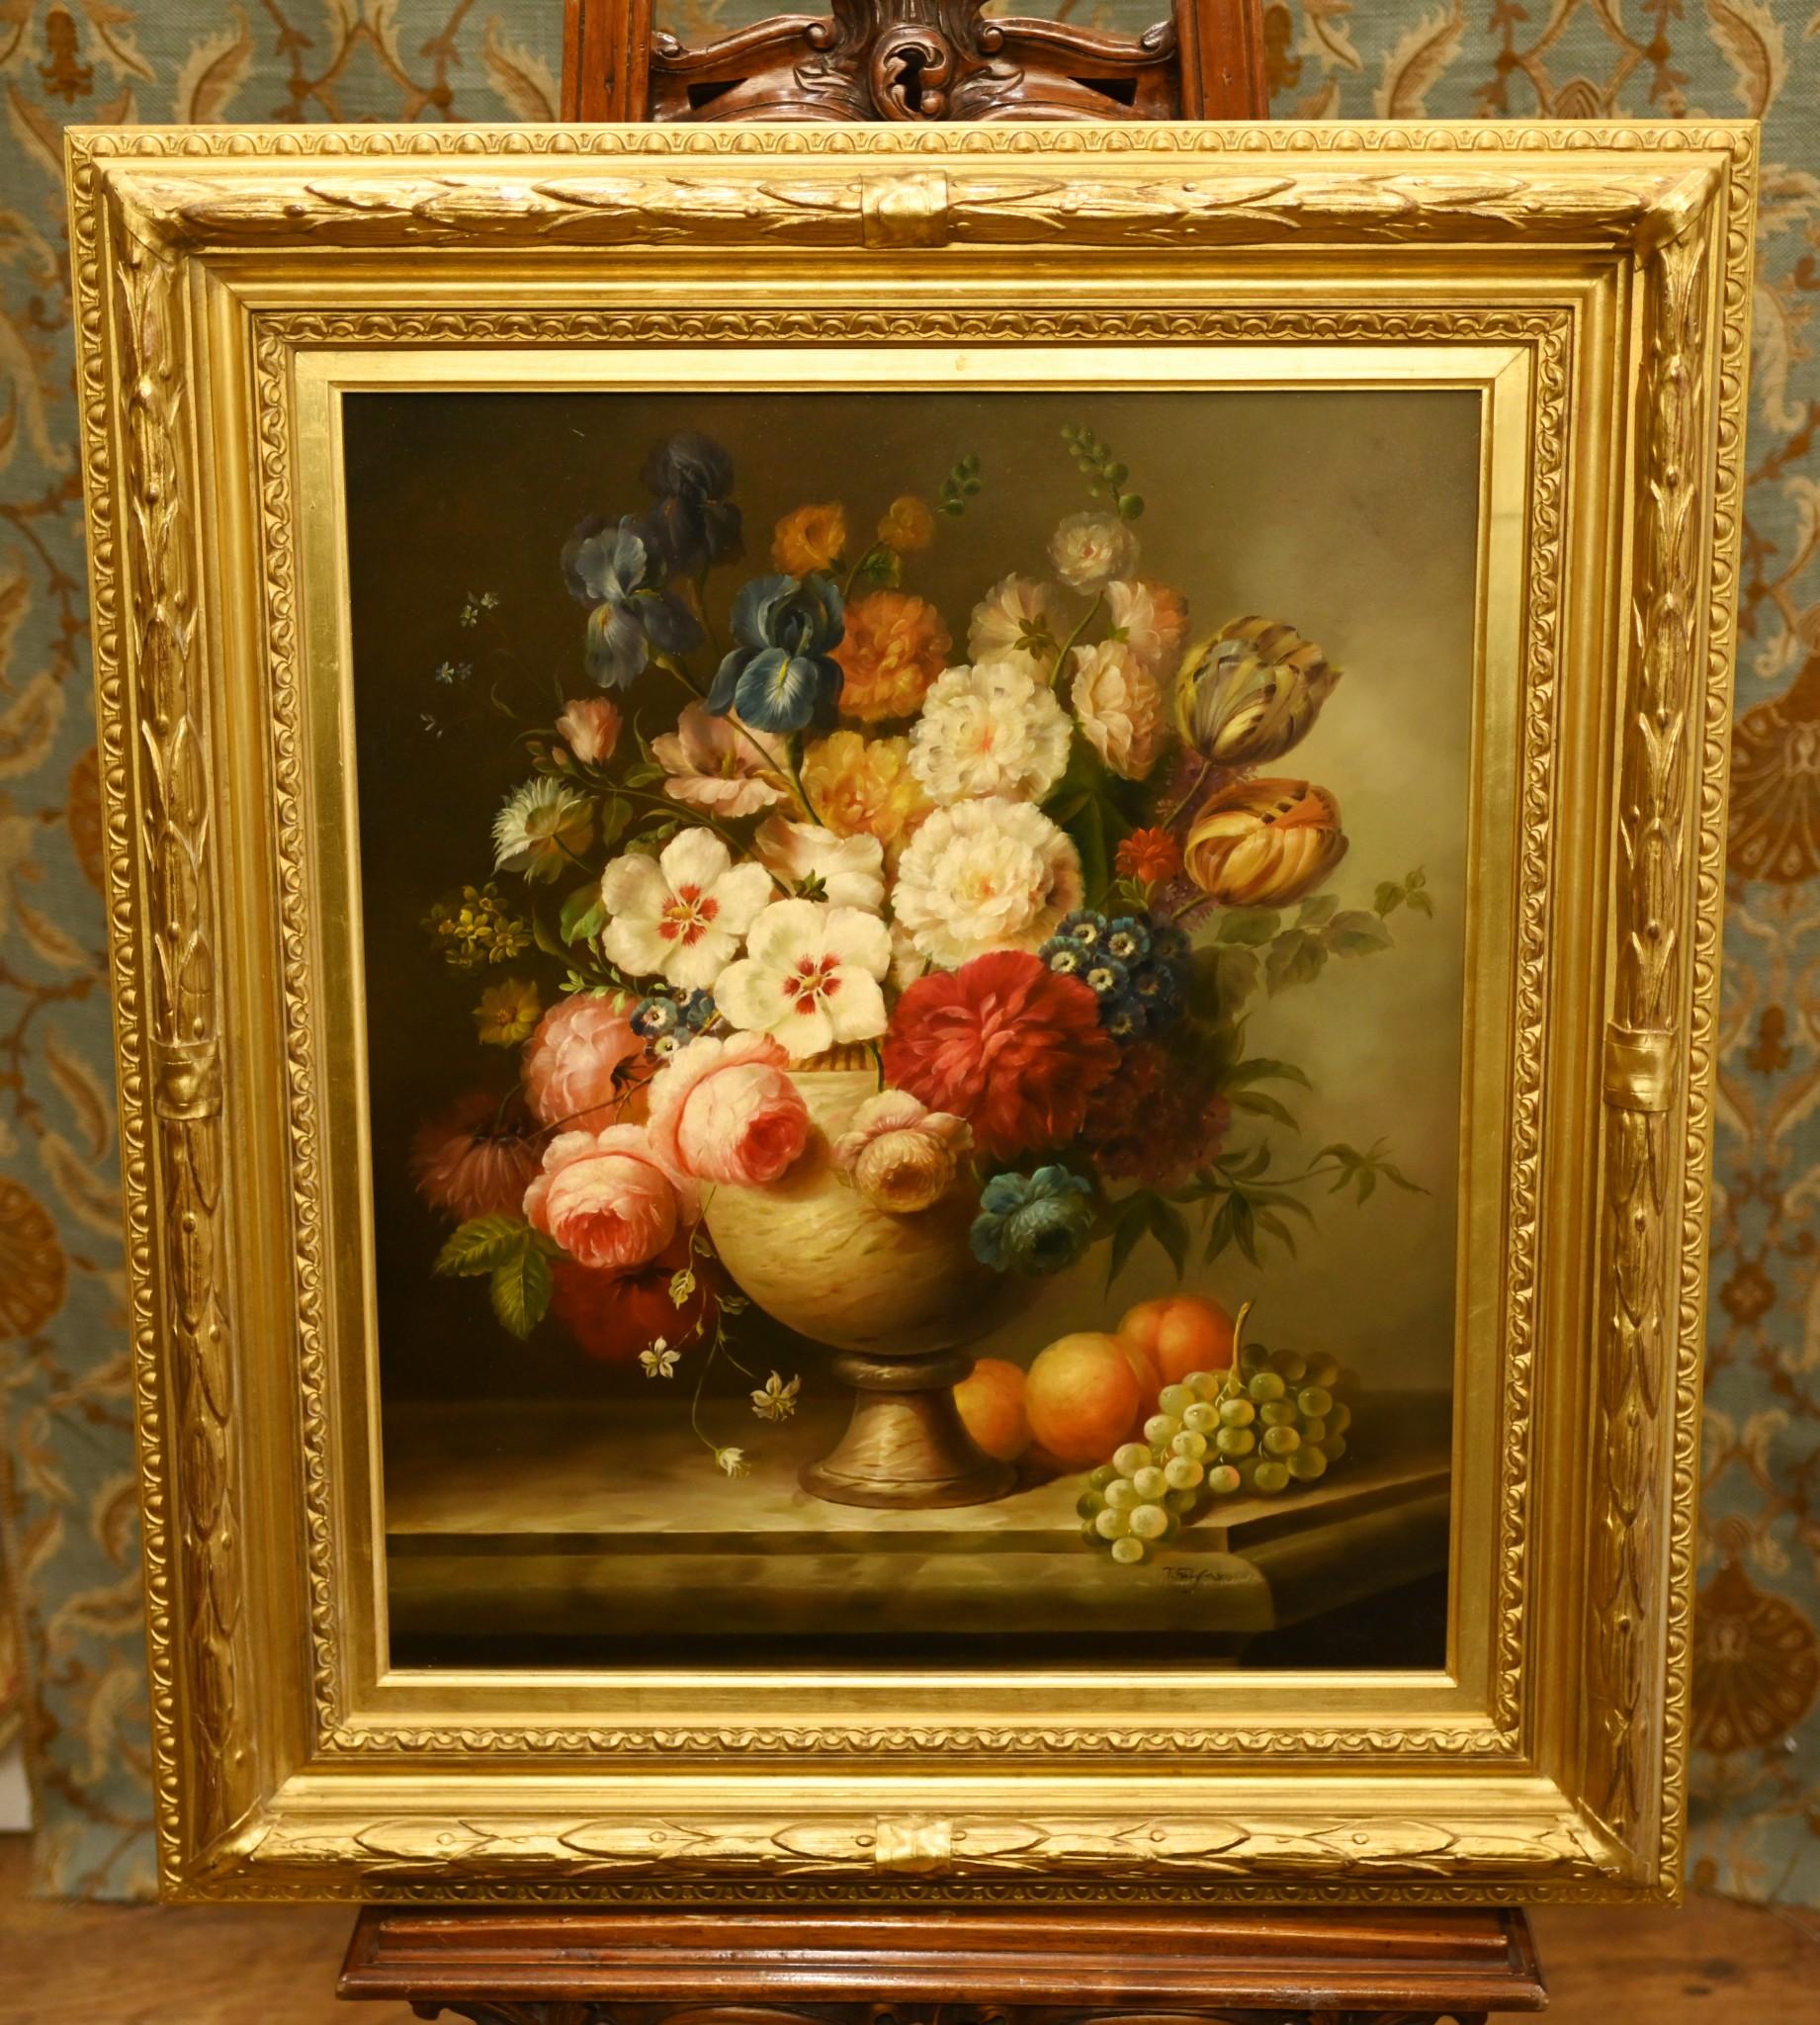 Vivid and bright Dutch floral still life oil painting
Brushwork so detailed and this really has a lot of verve and energy, would definitly lighten up any room
Piece is signed in the bottom right corner - T Fairfax
We don't know much about the